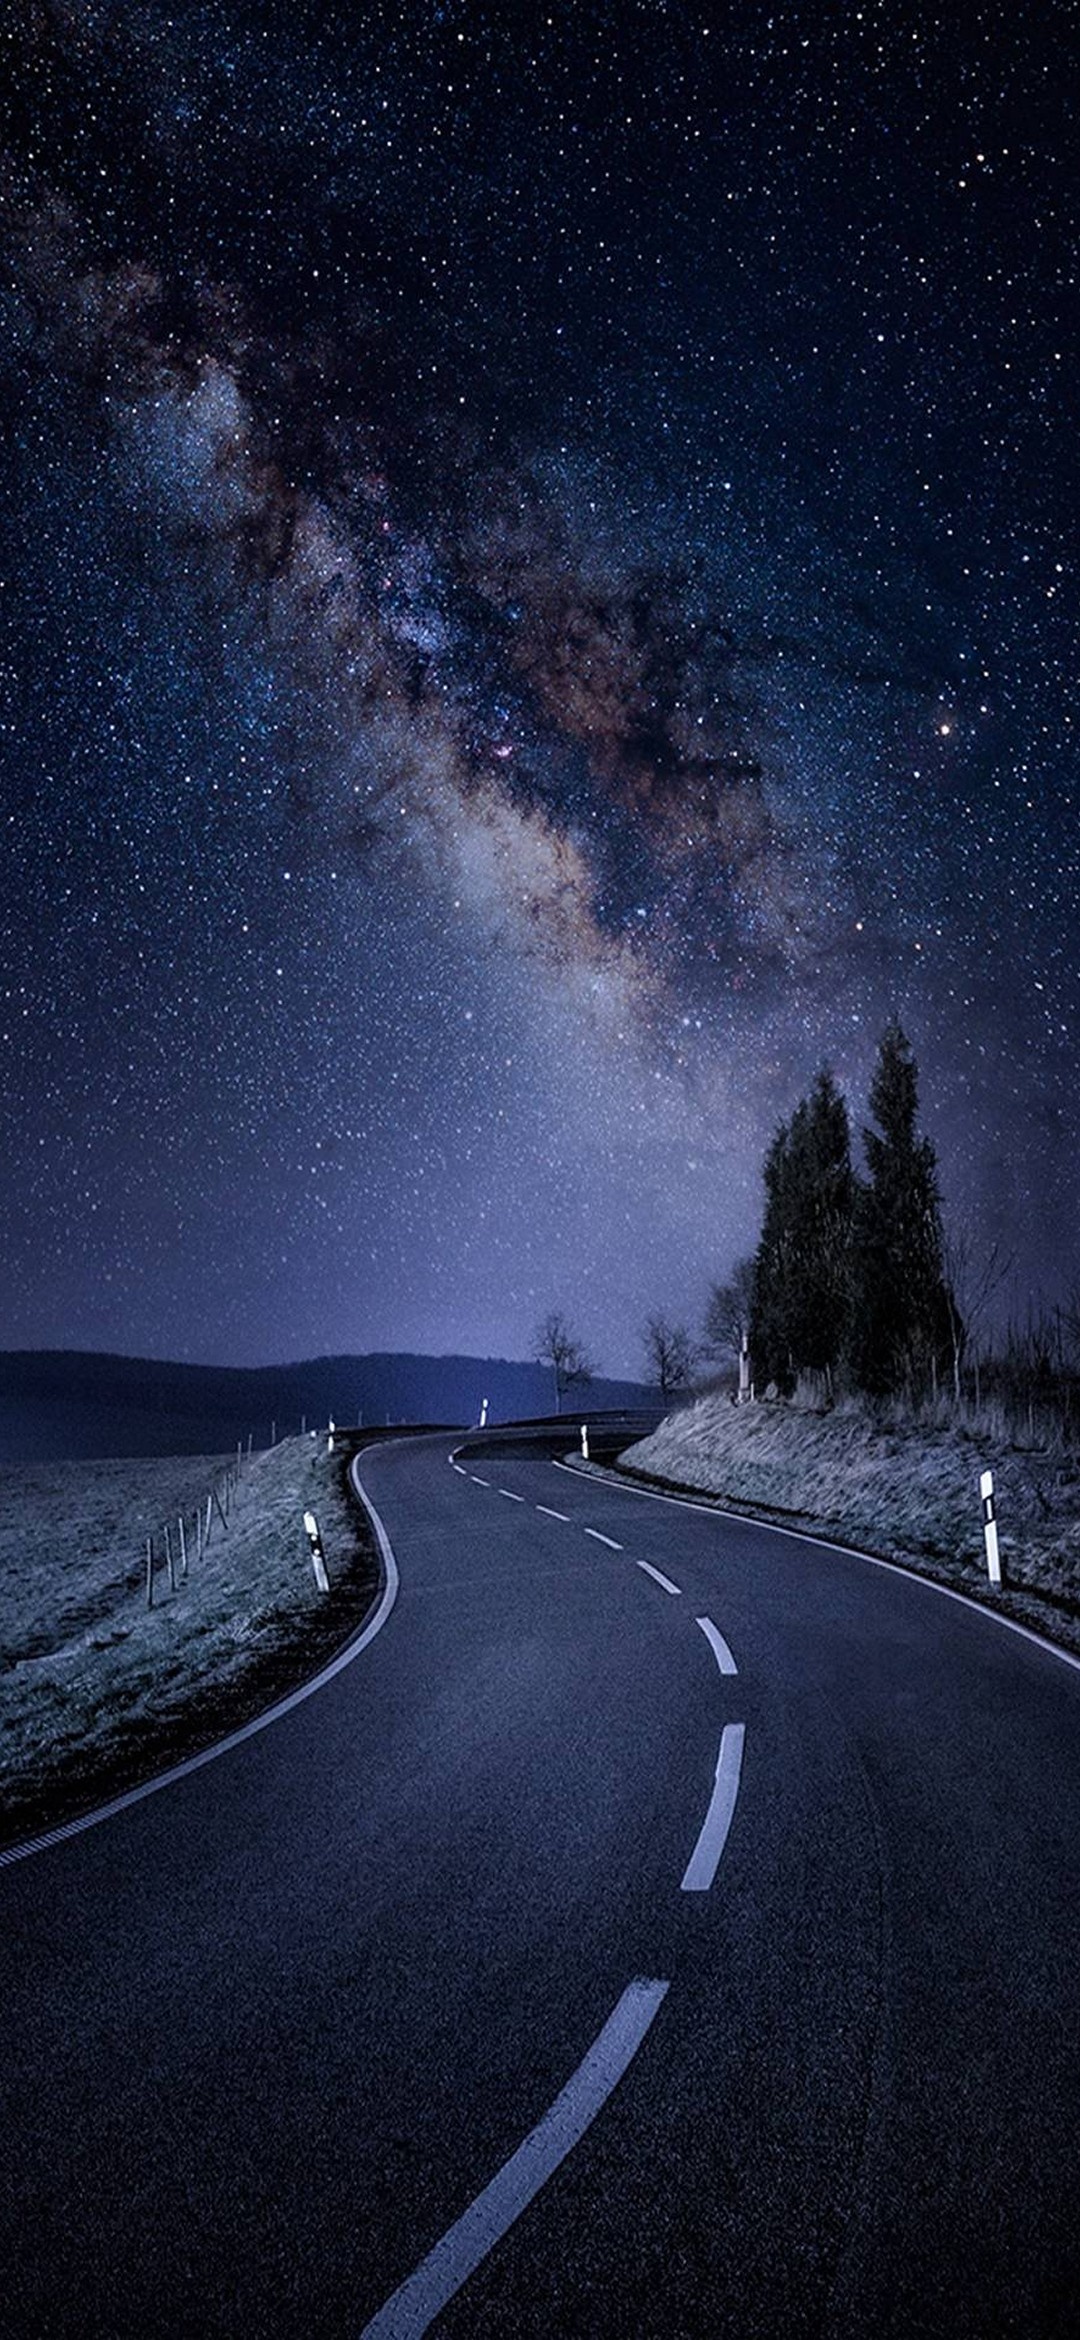 Landscape: The Milky Way, A sky full of stars at night, A perfect European road. 1080x2340 HD Background.